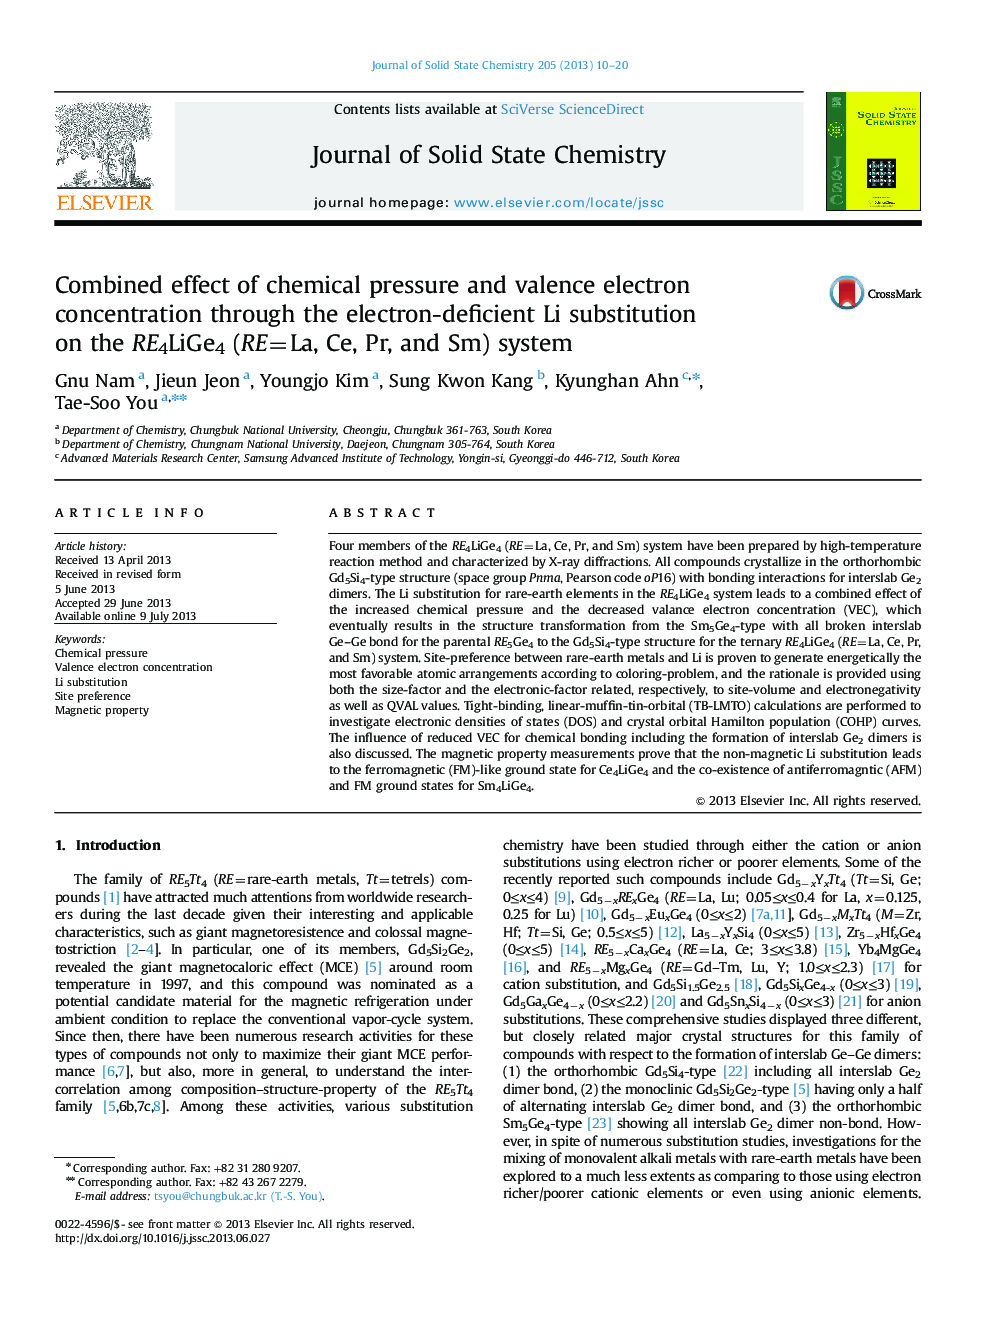 Combined effect of chemical pressure and valence electron concentration through the electron-deficient Li substitution on the RE4LiGe4 (RE=La, Ce, Pr, and Sm) system